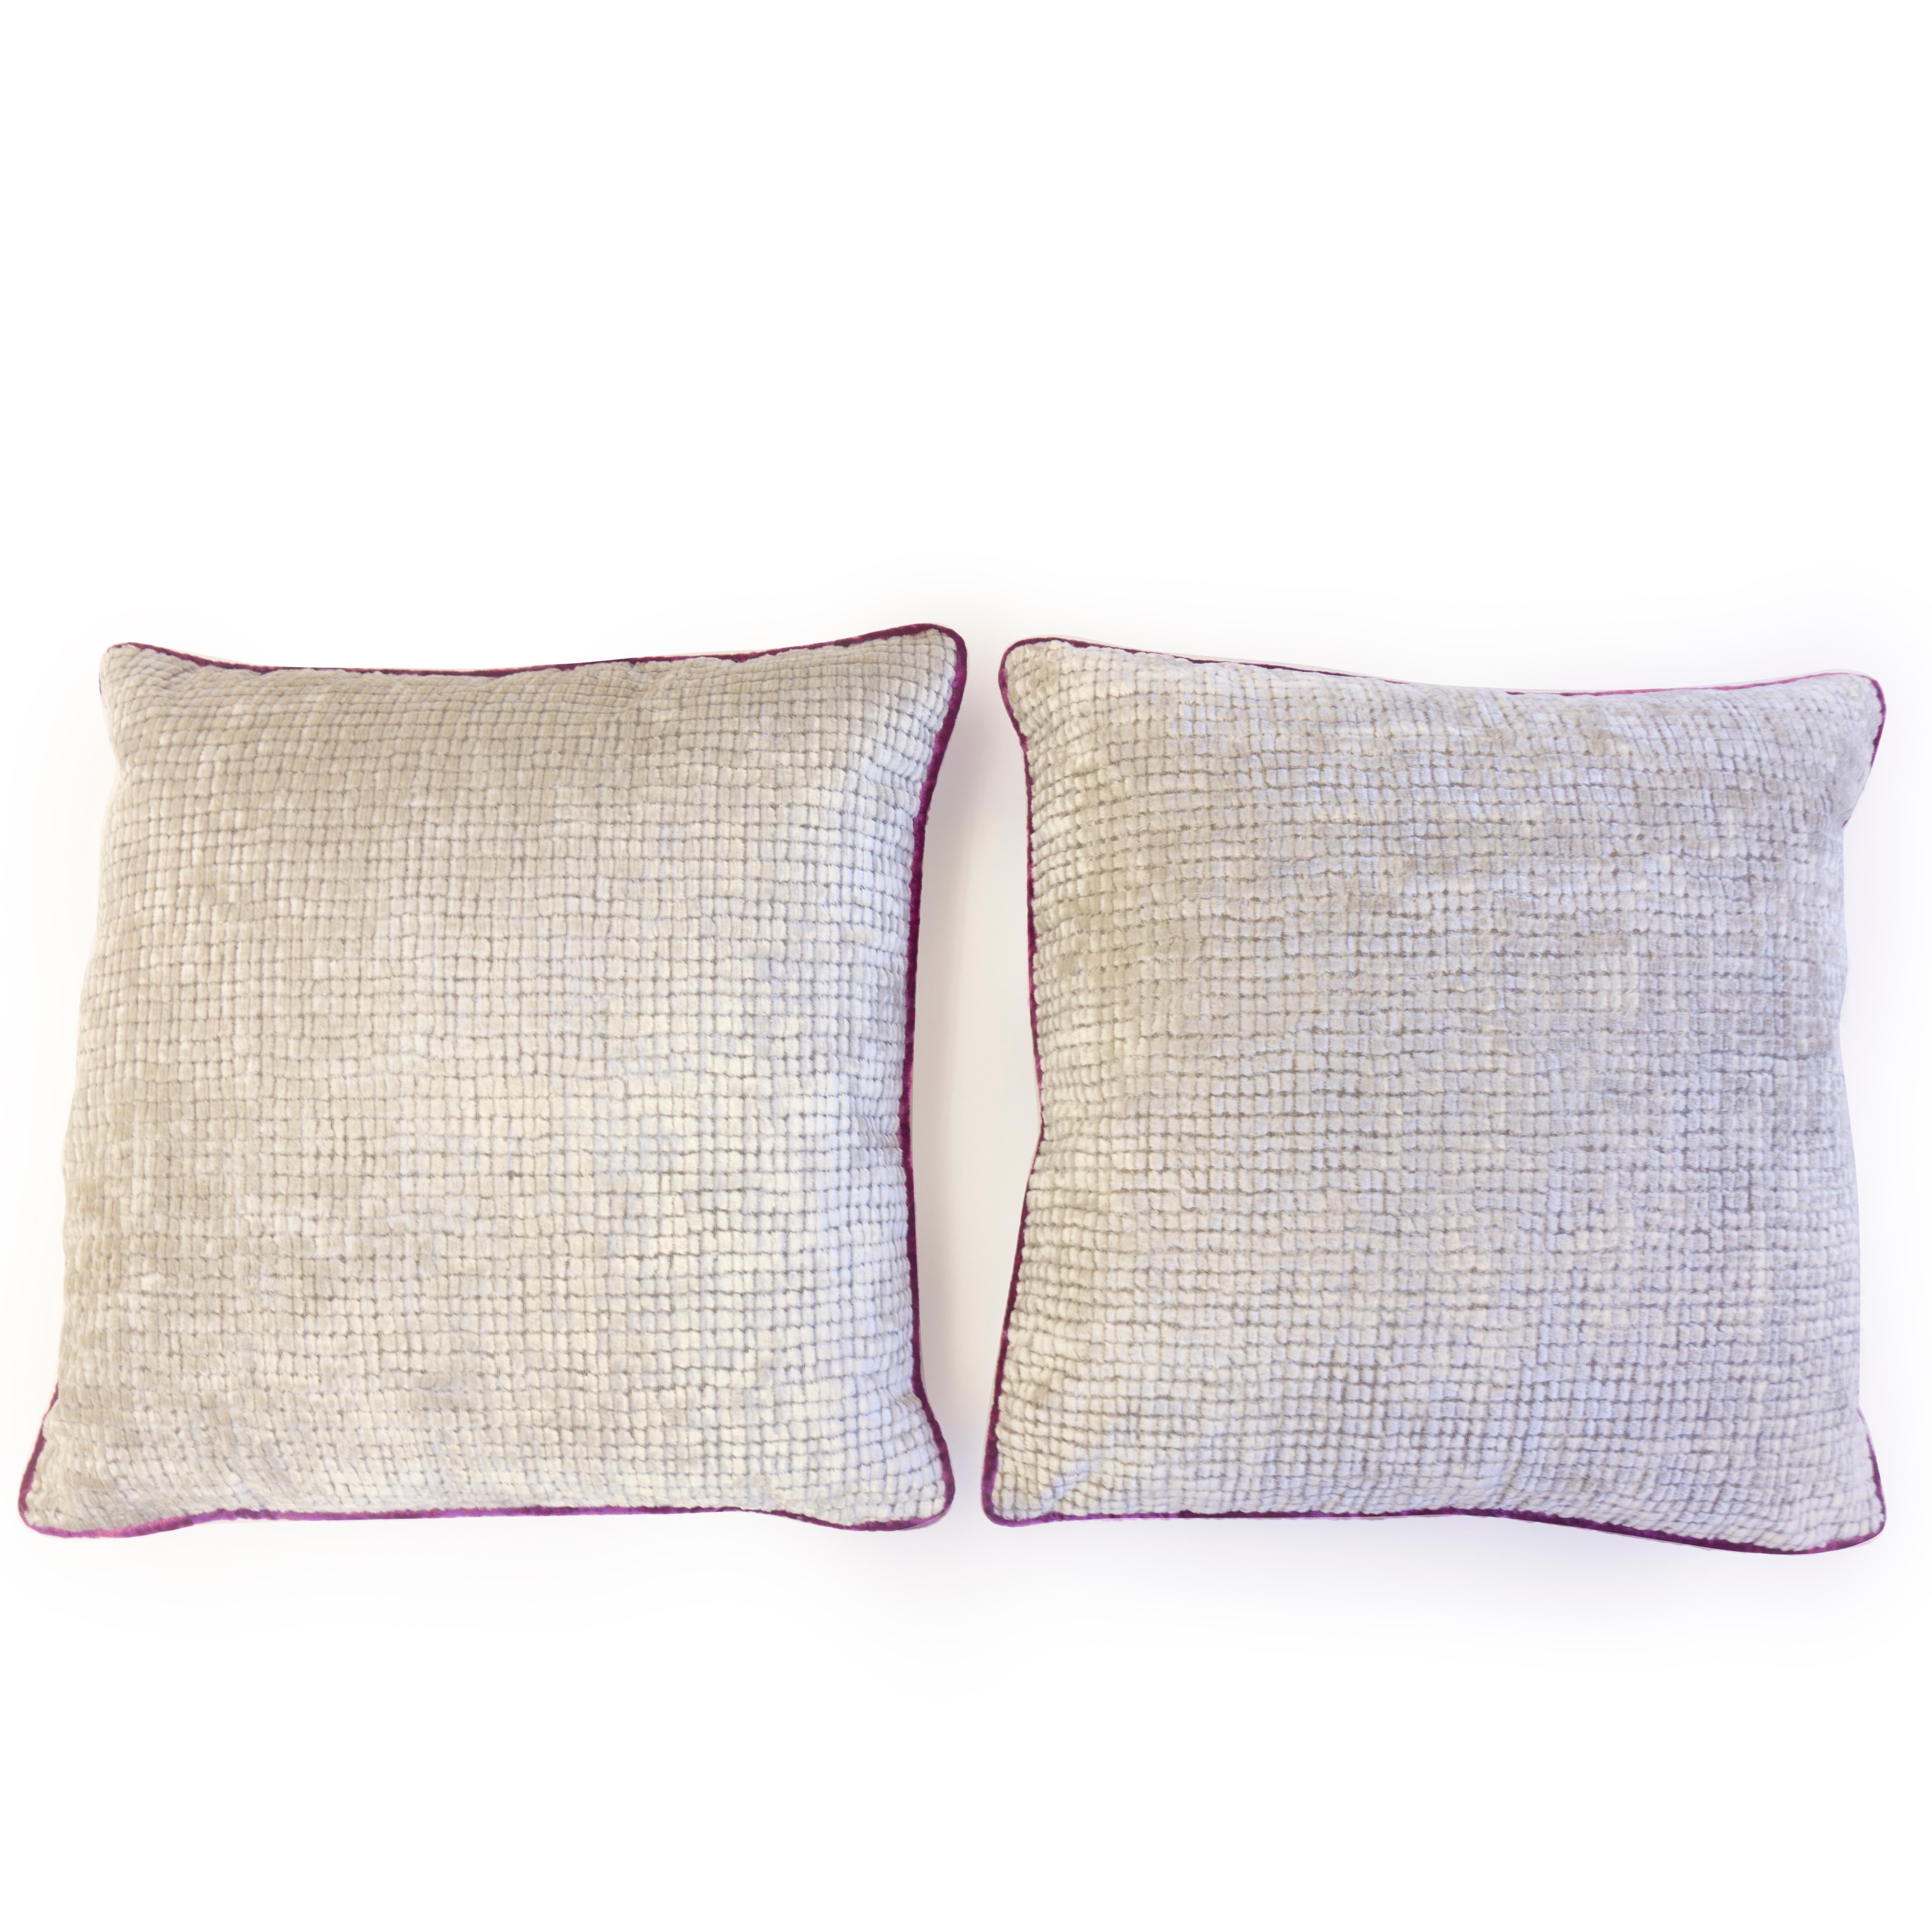 These pillows were hand sewn at our studio in Norwalk, Connecticut. They feature a soft velvet square grid pattern on the front and a weaved fabric on the back that glimmers. Fuchsia piping borders the pillow. 

Measurements: 20